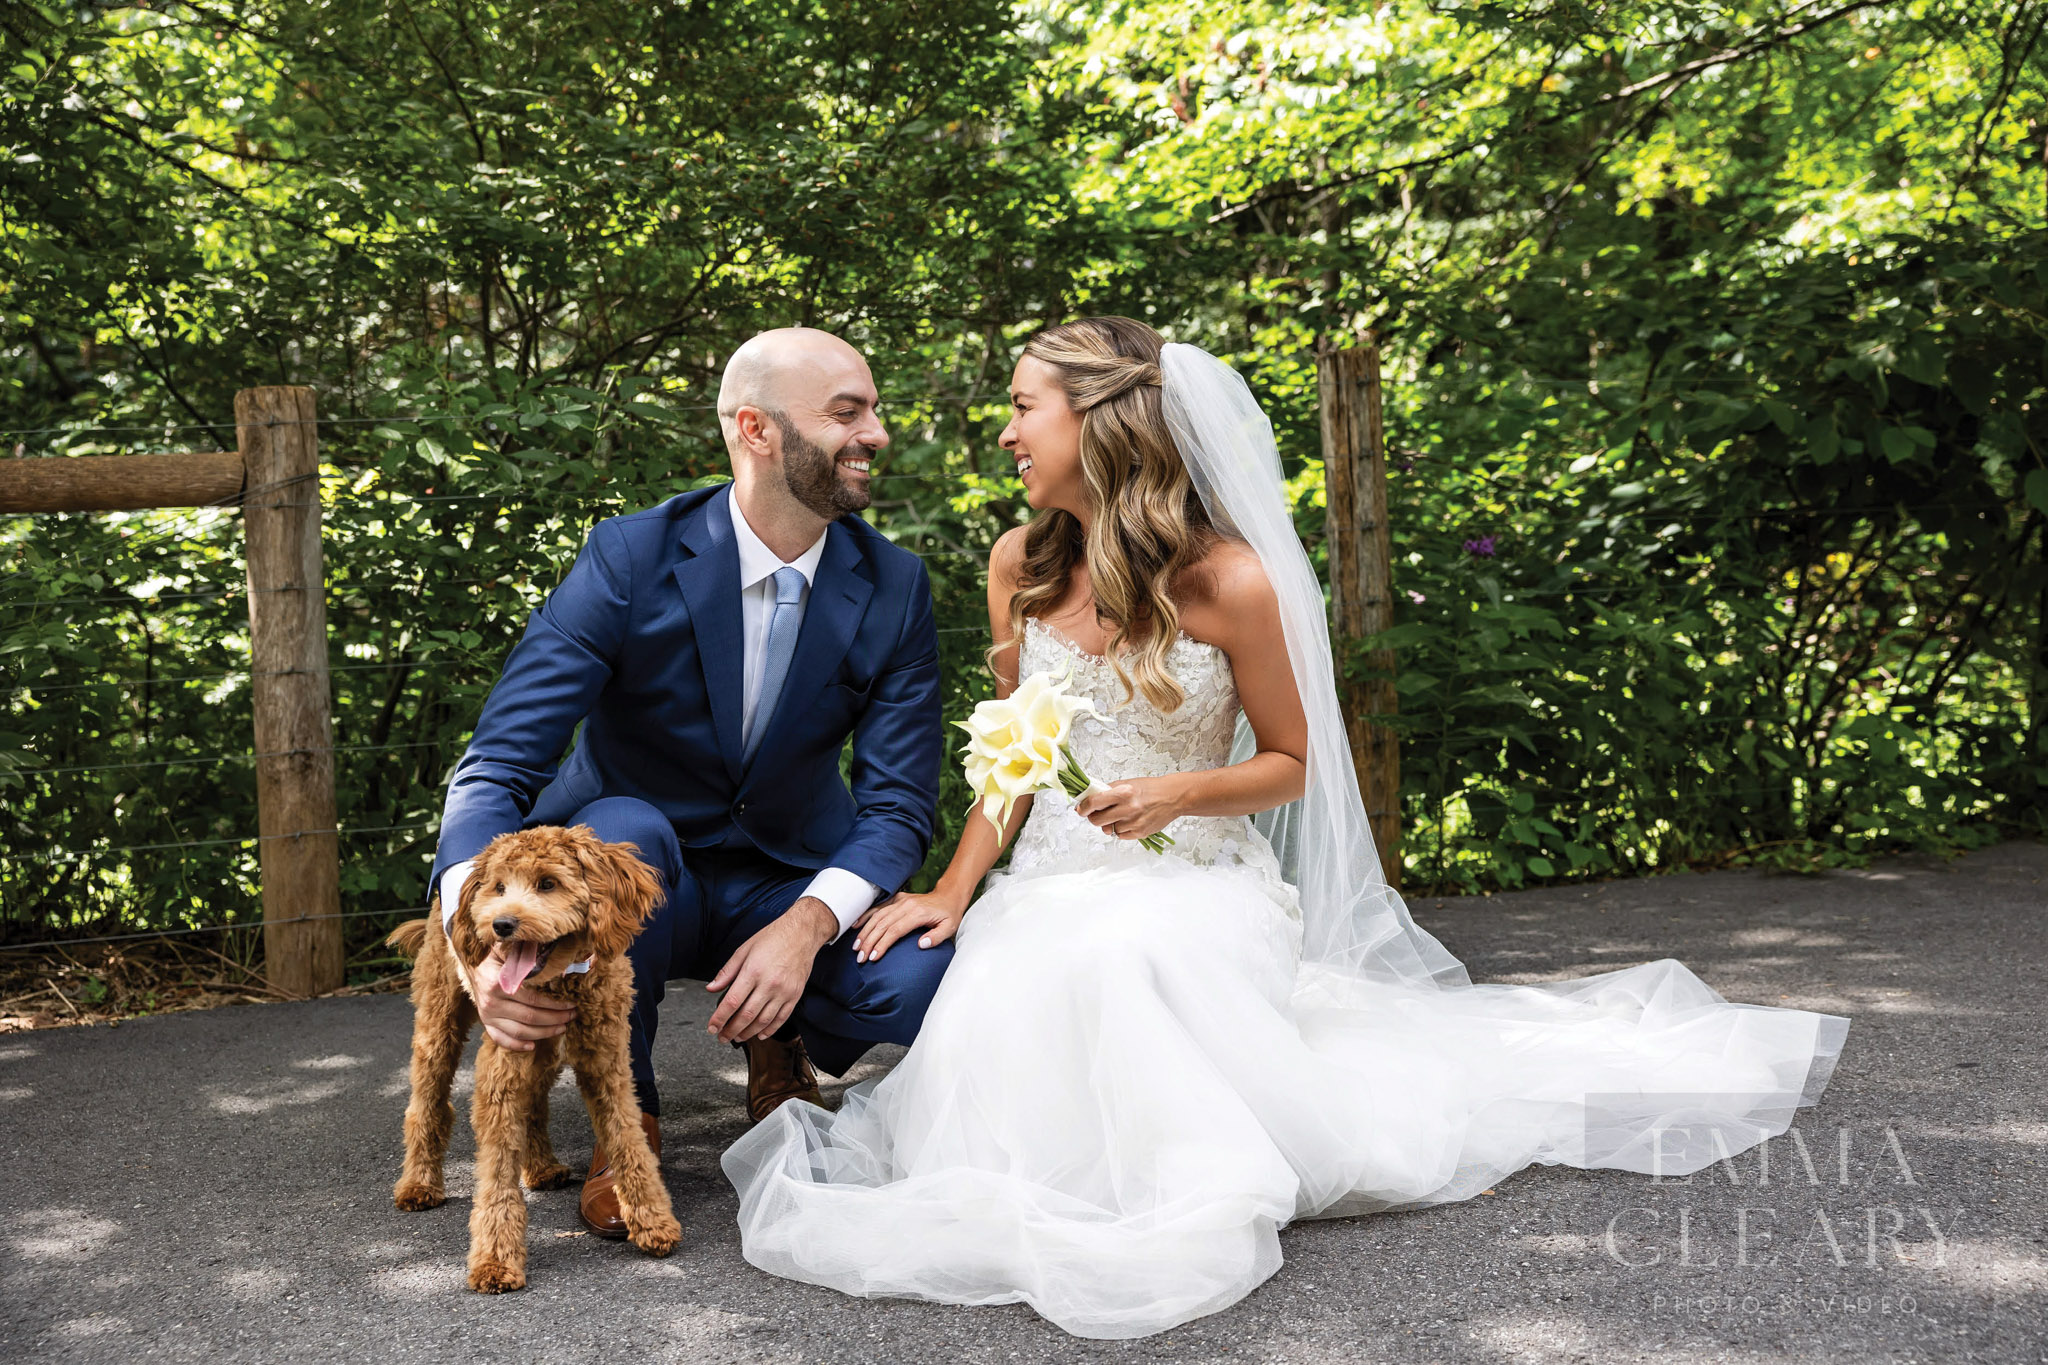 The bride and groom with their dog friend